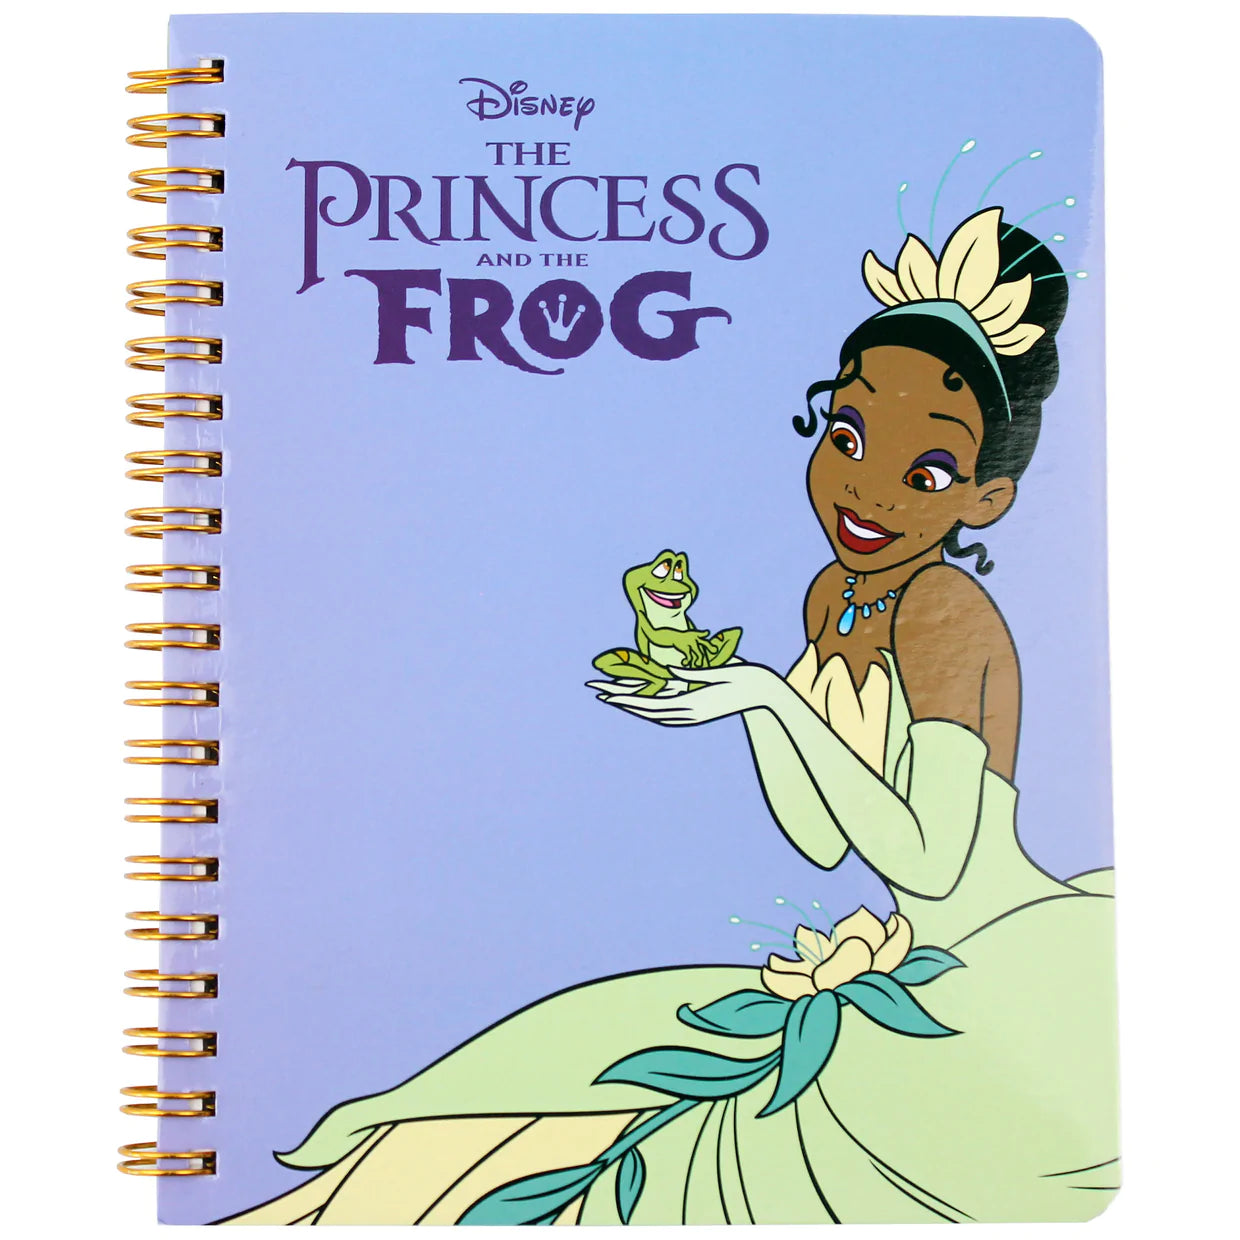 Tiana (Princess and the Frog) Disney Vintage Style Notebook